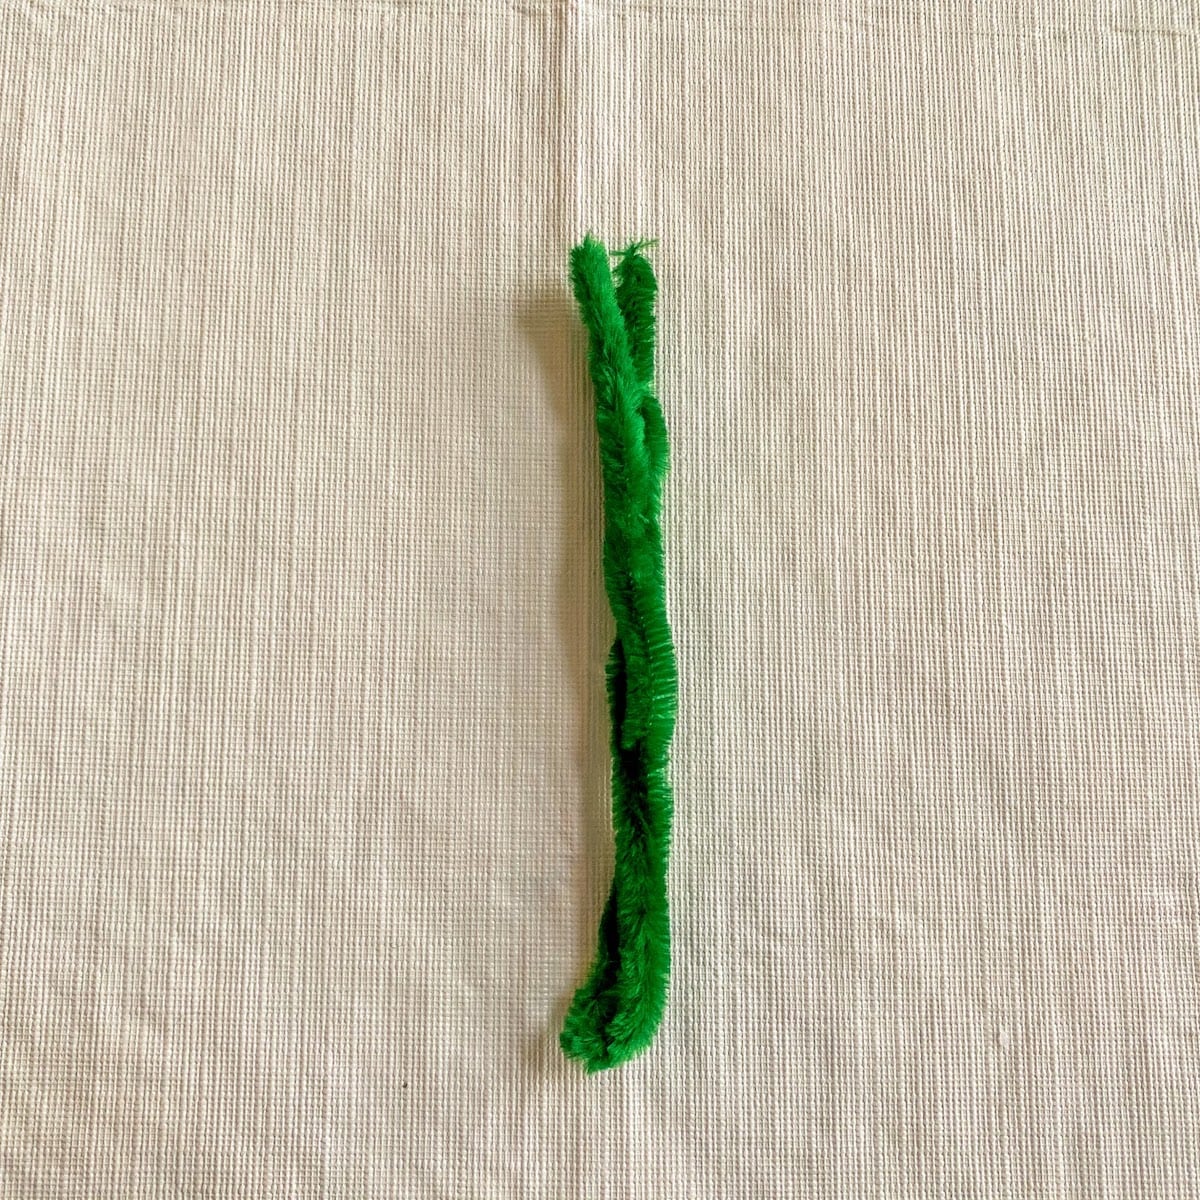 green pipe cleaner folded in half